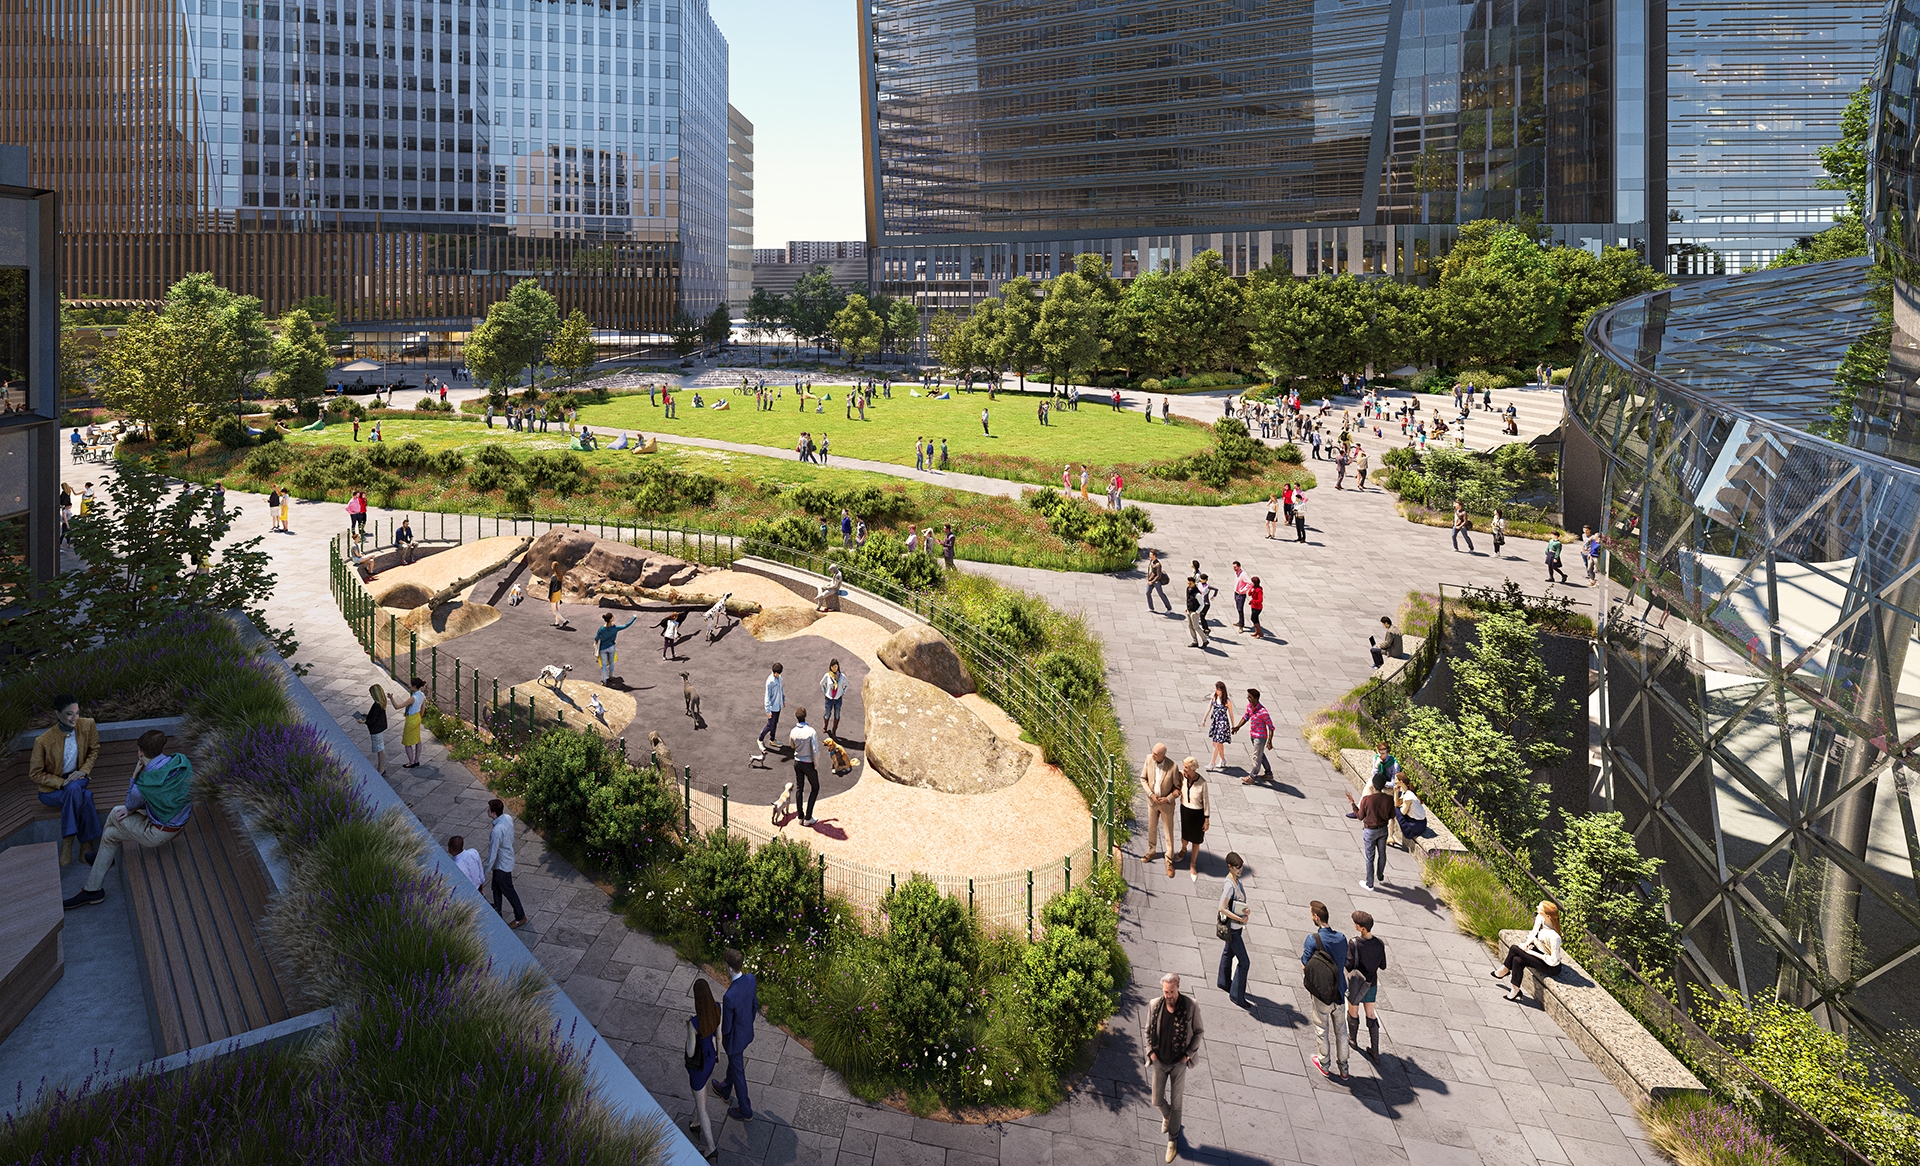 An artist rendering of green space at Amazon's PenPlace campus in Arlington, Virginia.